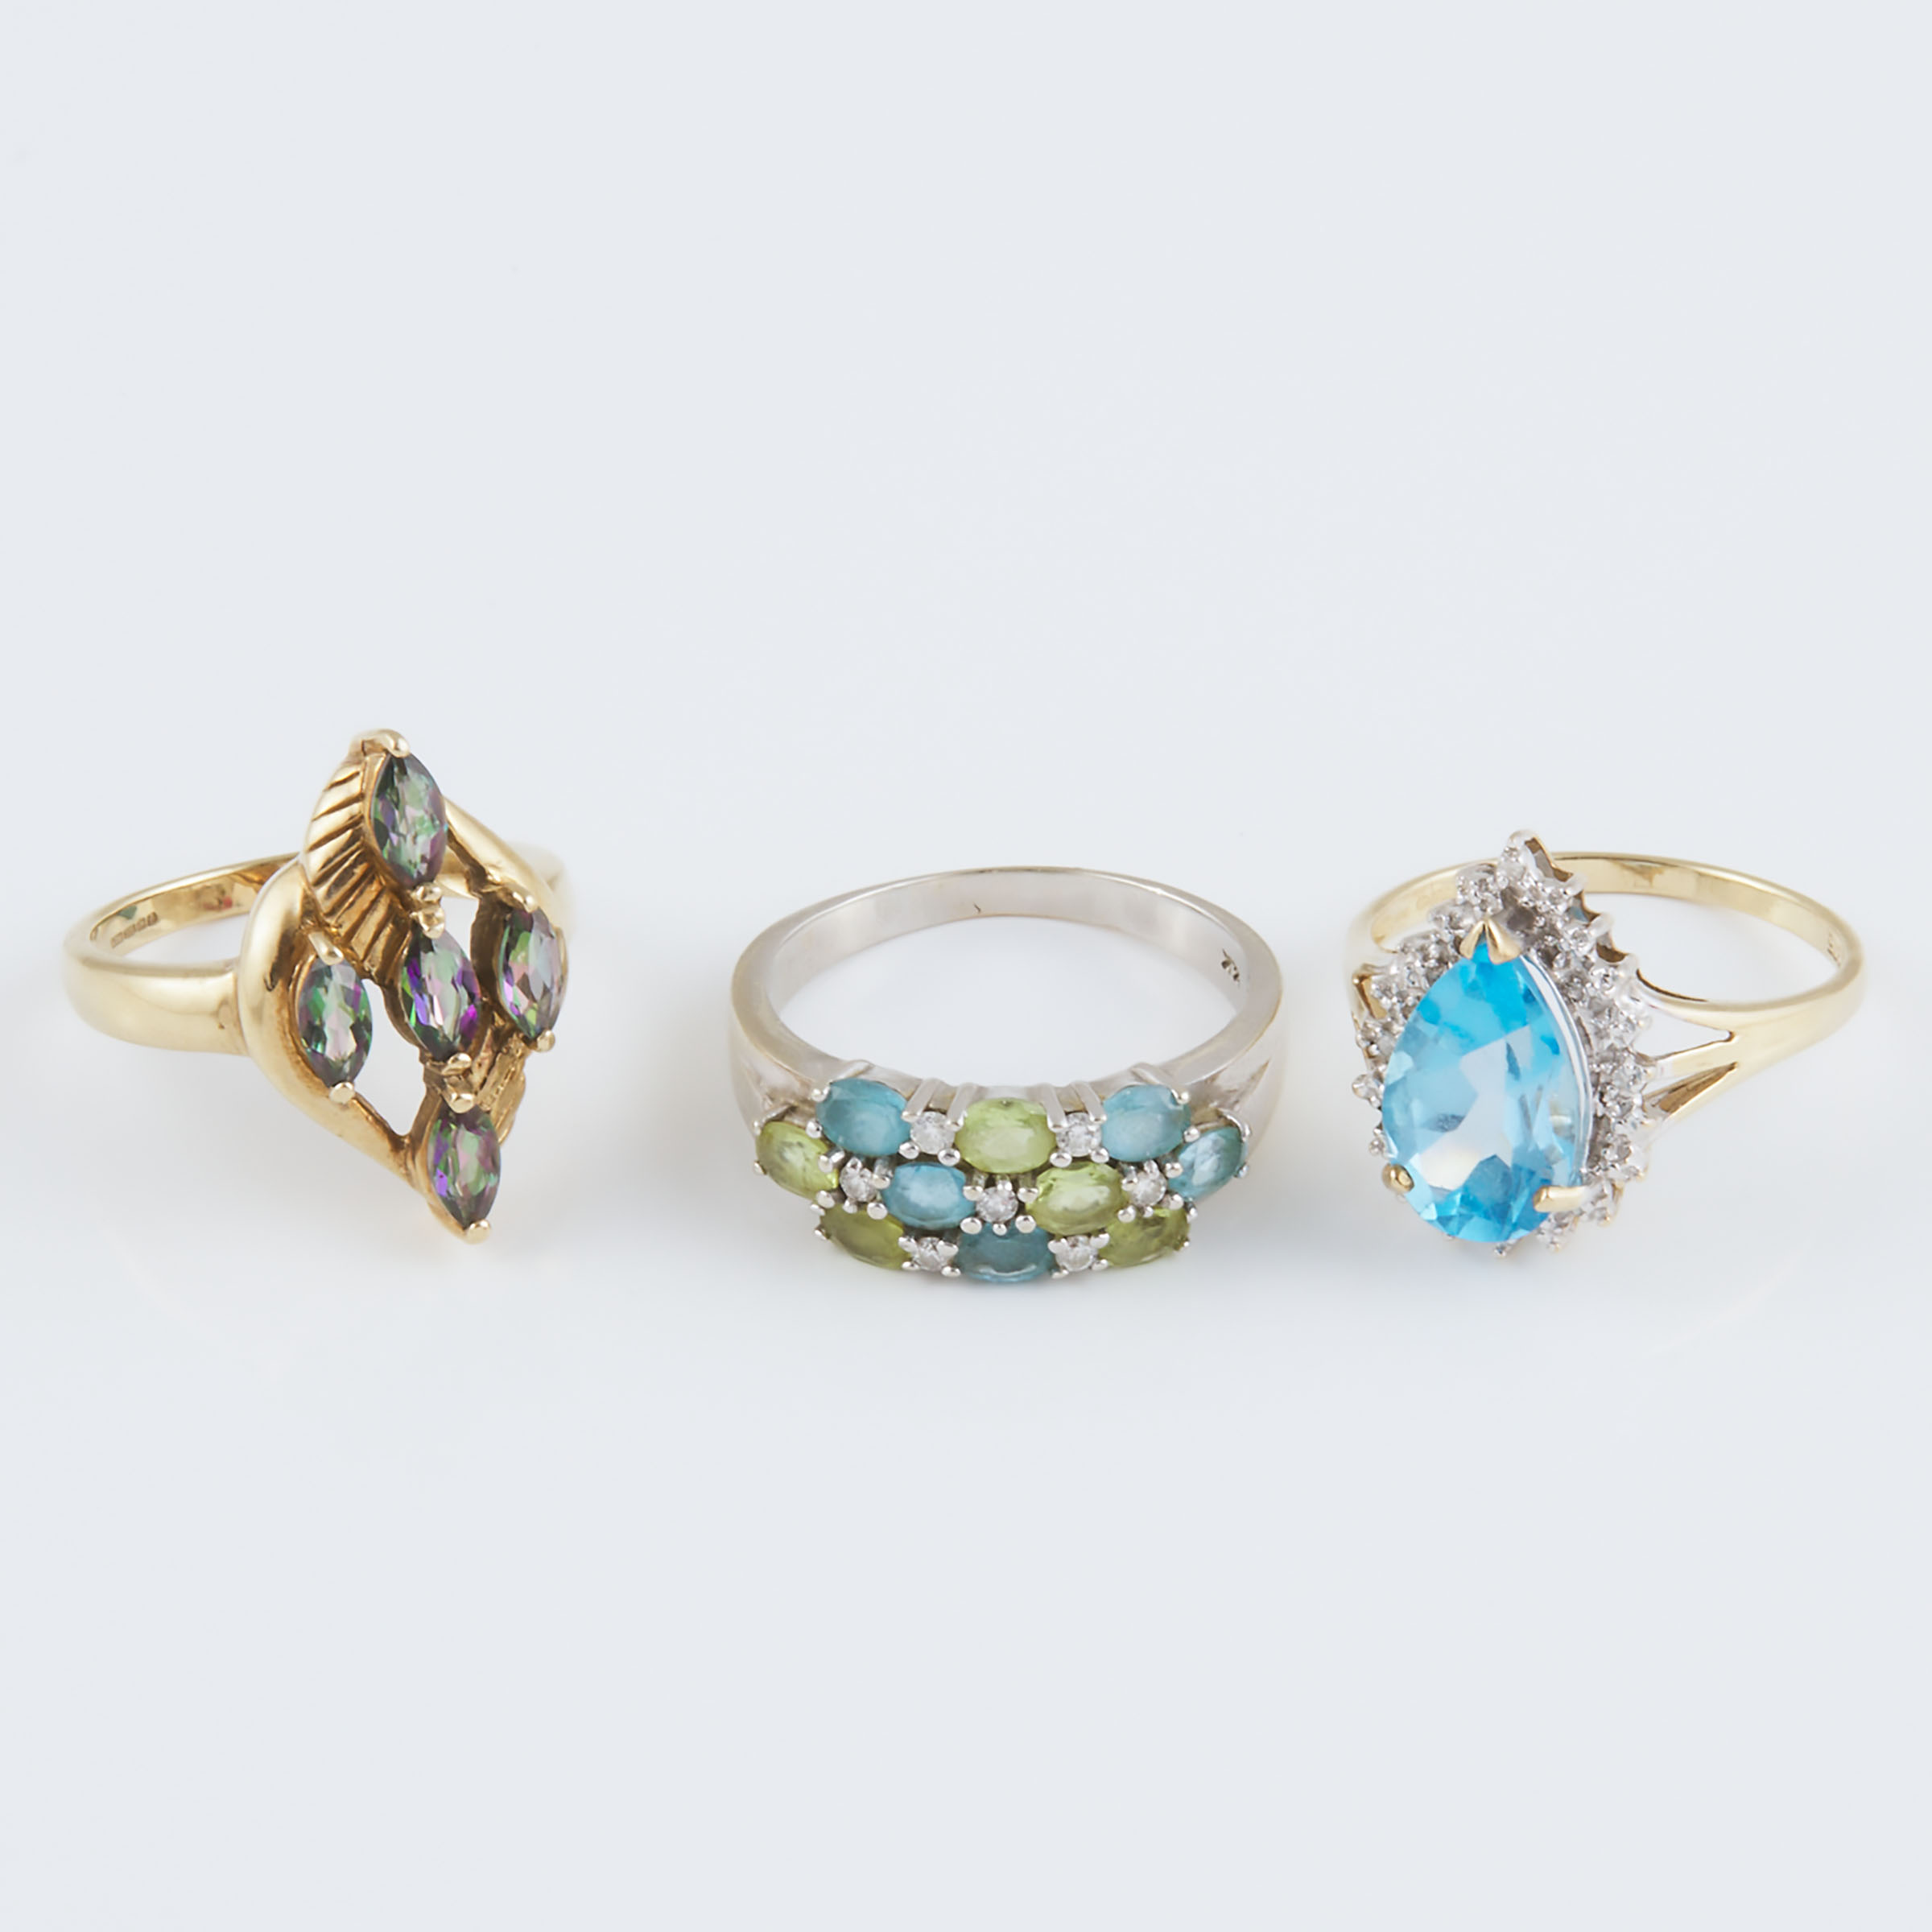 1 x 14k White And 2 x English 9k Yellow Gold Rings